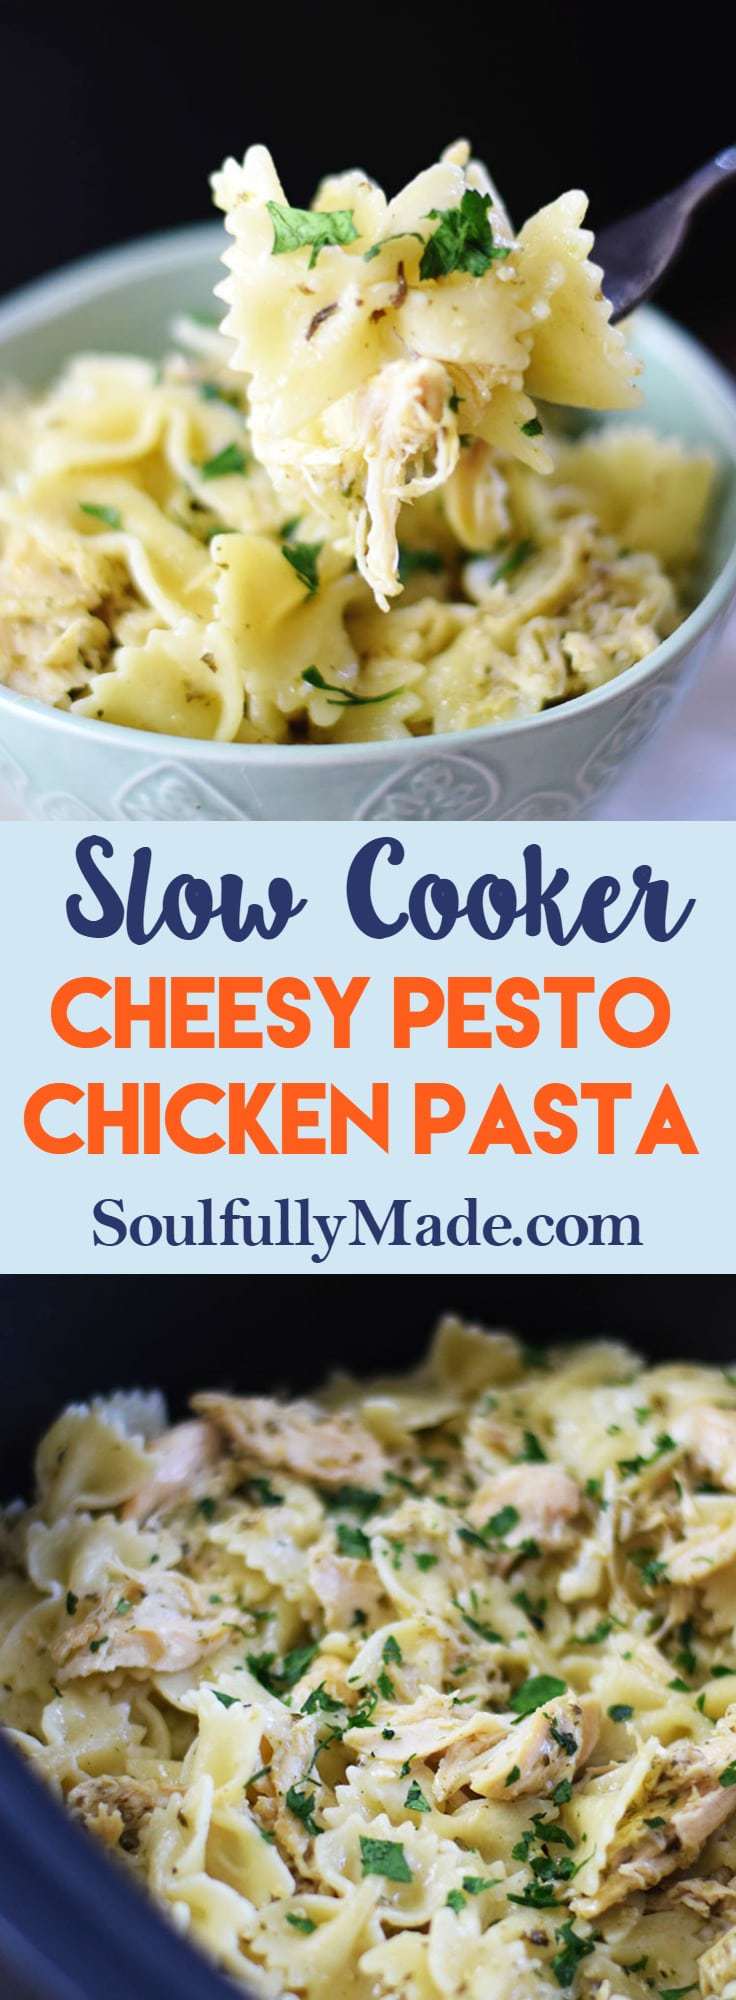 the Pinterest image for this slow cooker cheesy pesto chicken pasta